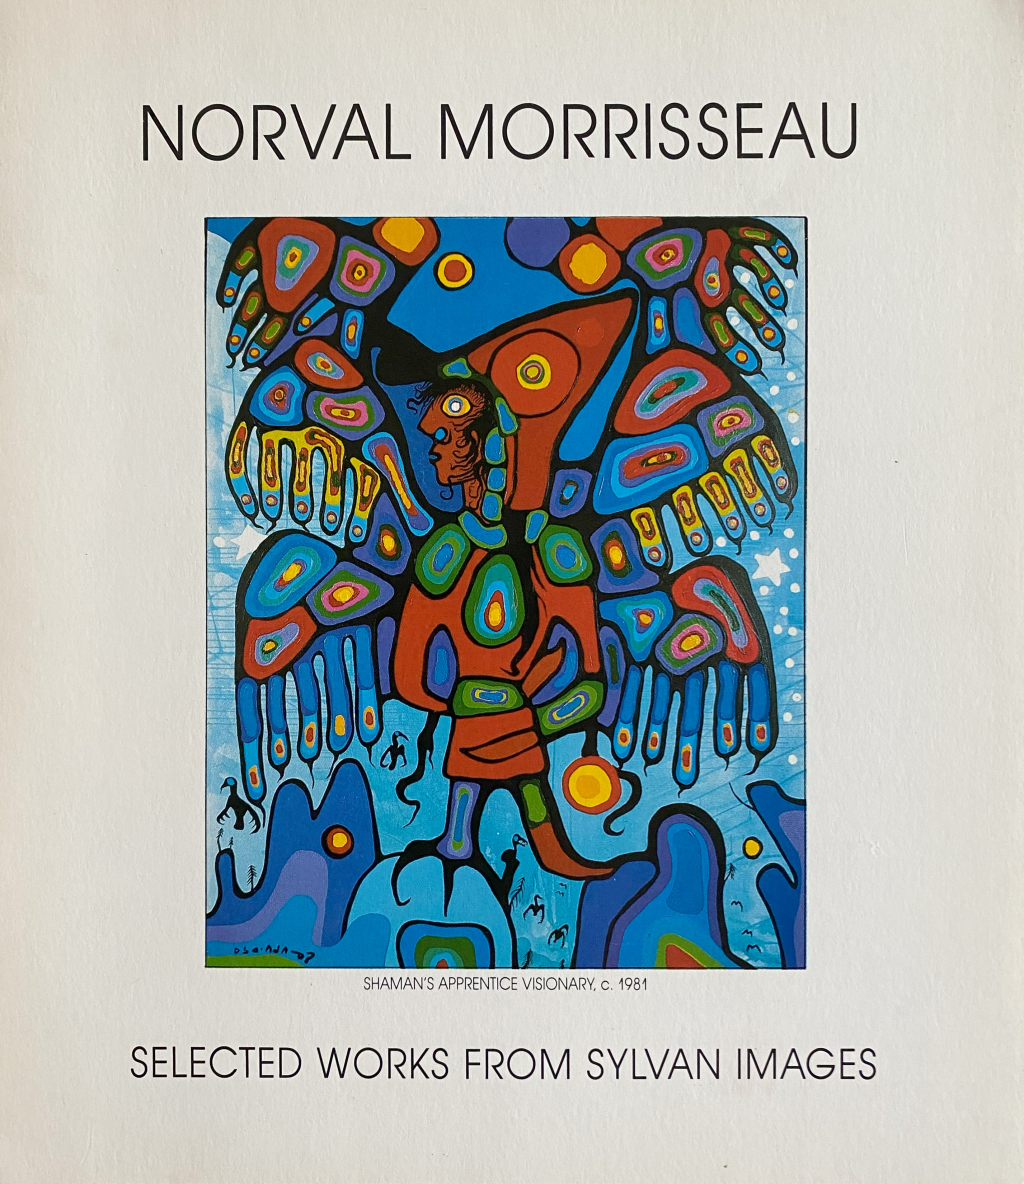 Catalogue cover for the inaugural Morrisseau exhibition at Ontario North Now gallery